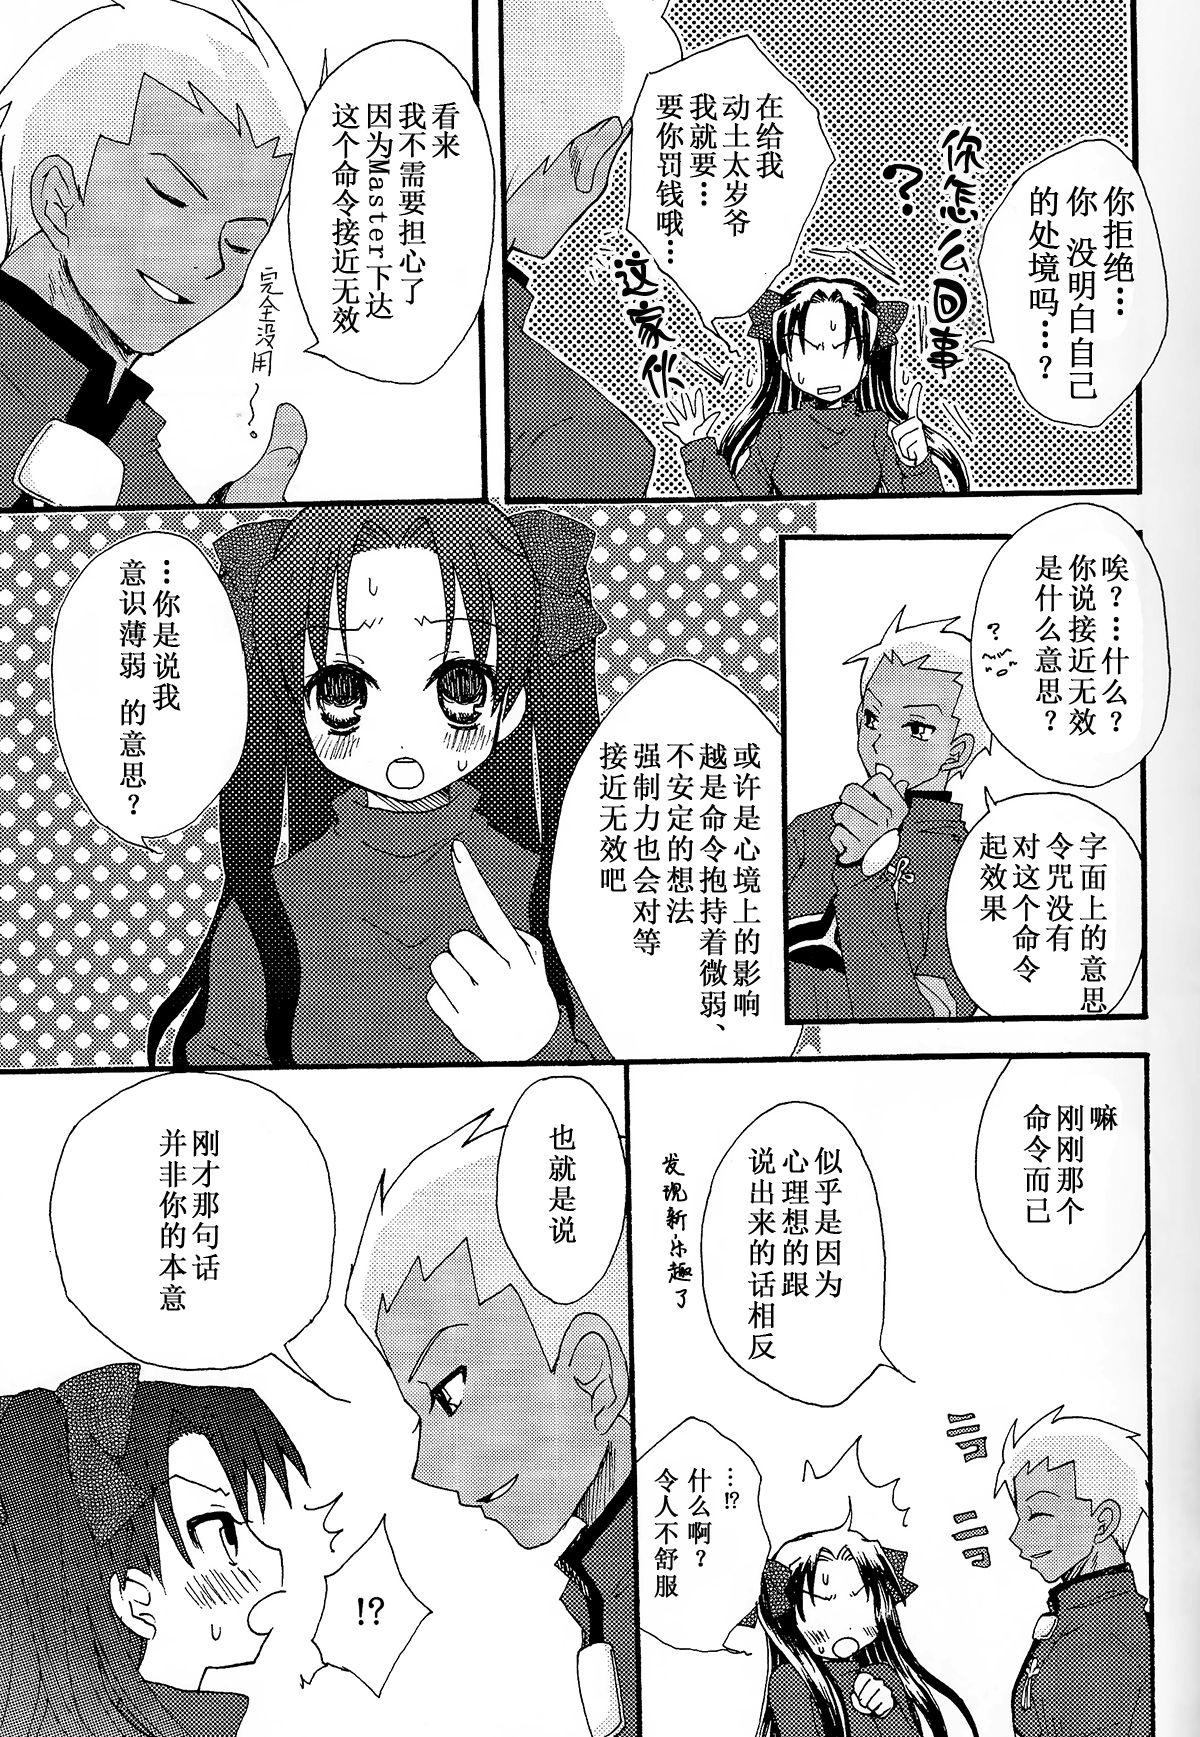 Women Kanojo to Aiken - Fate stay night Magrinha - Page 6